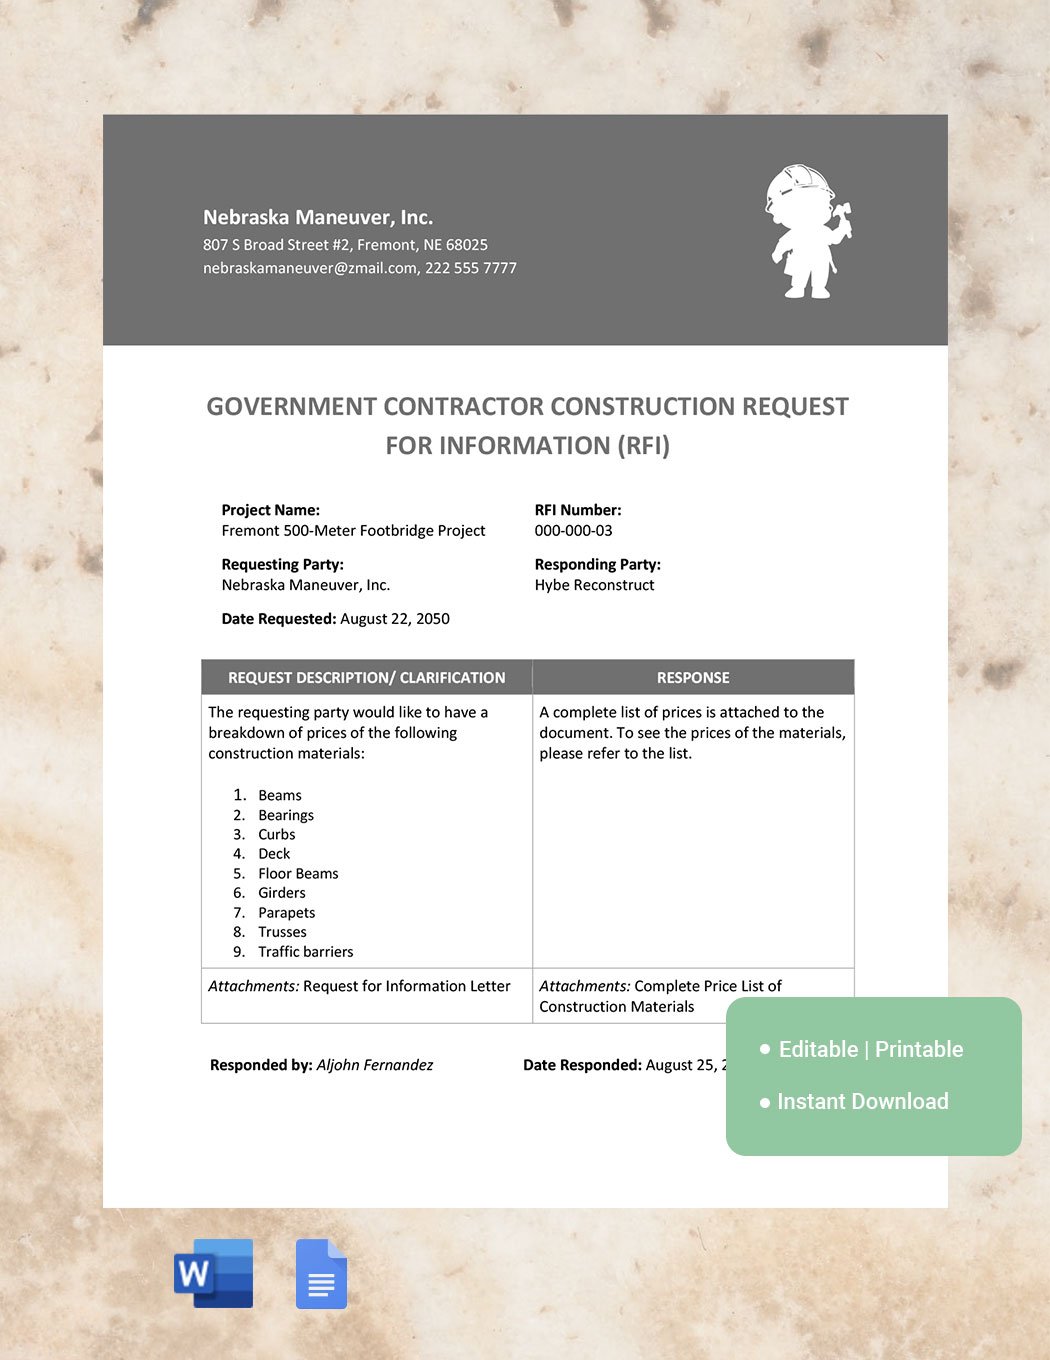 Free Government Contractor Construction Request For Information Template in Word, Google Docs